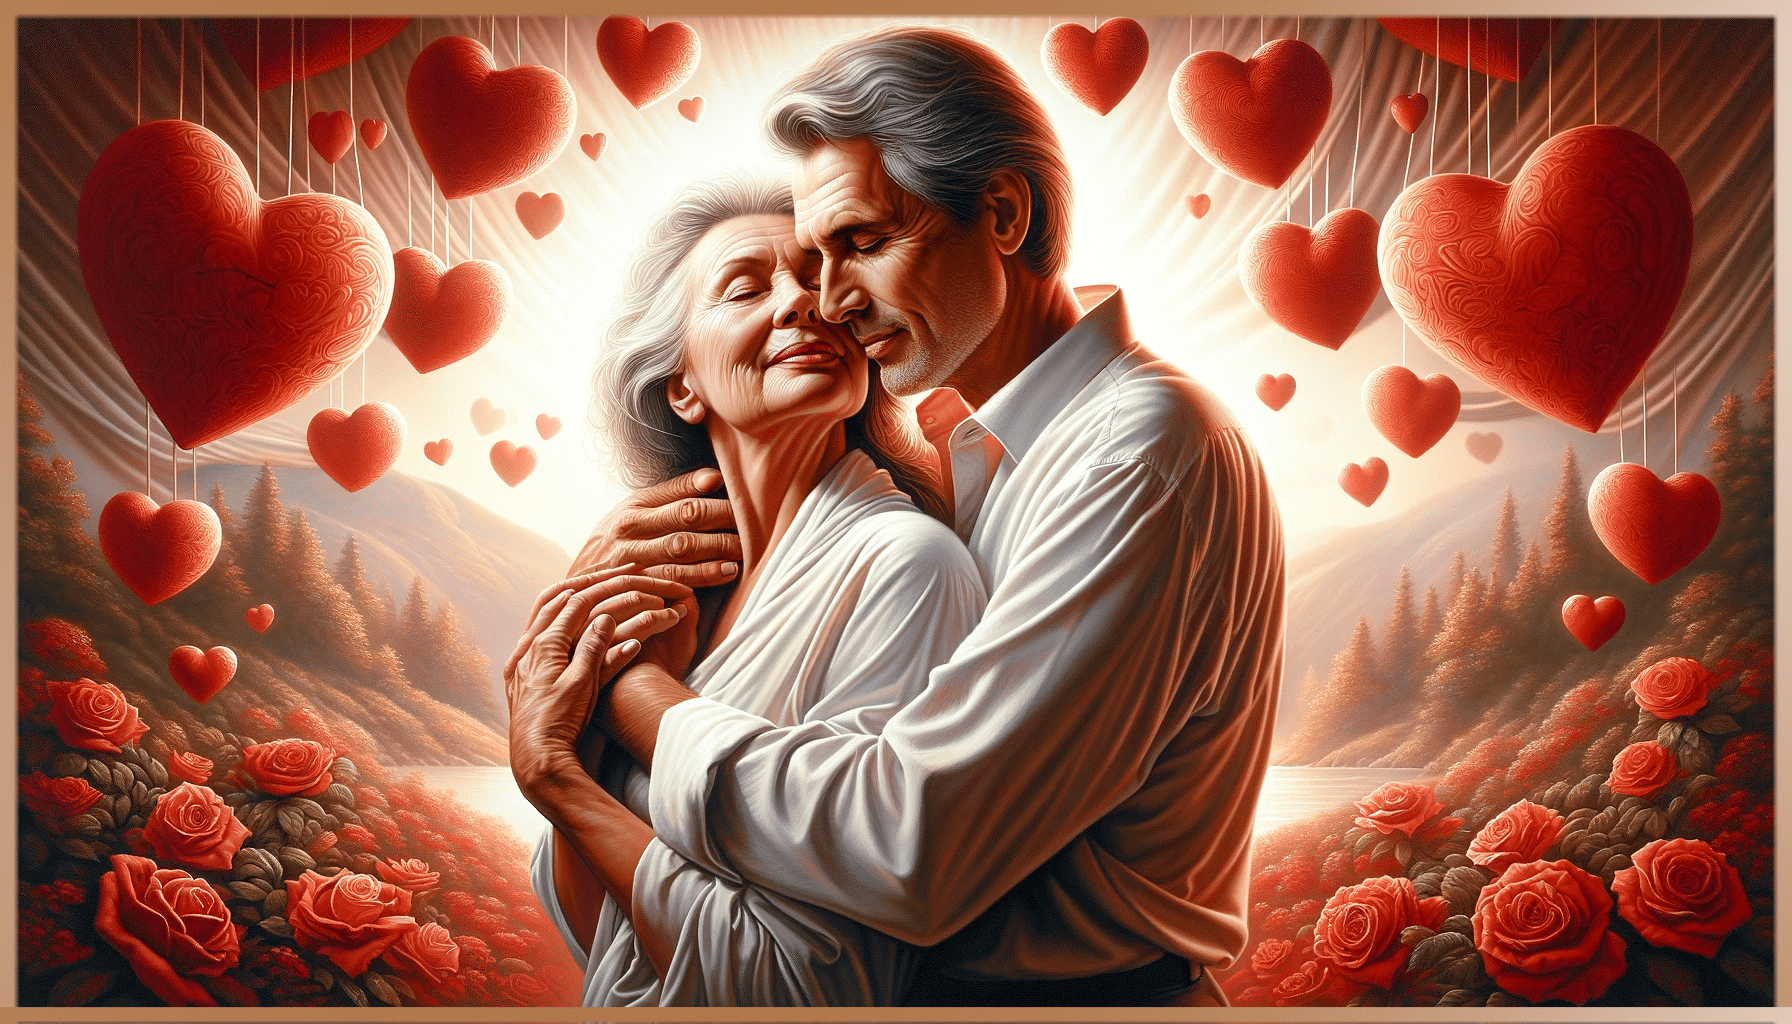 An older couple in a loving embrace among heart-shaped balloons and roses, symbolizing enduring affection